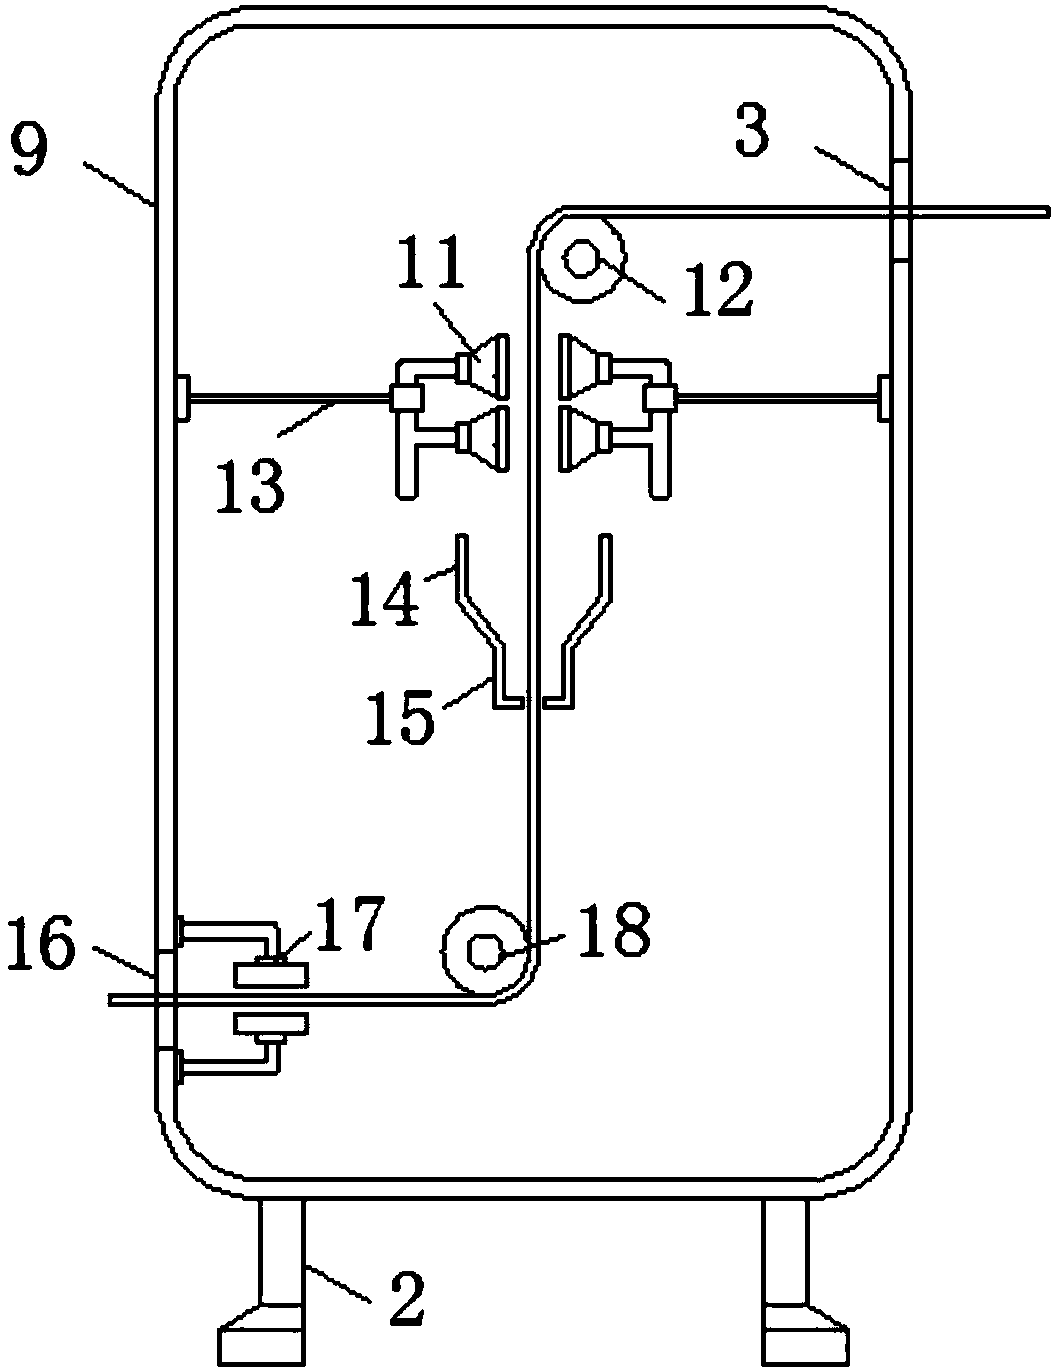 Fabric wetting device for textile